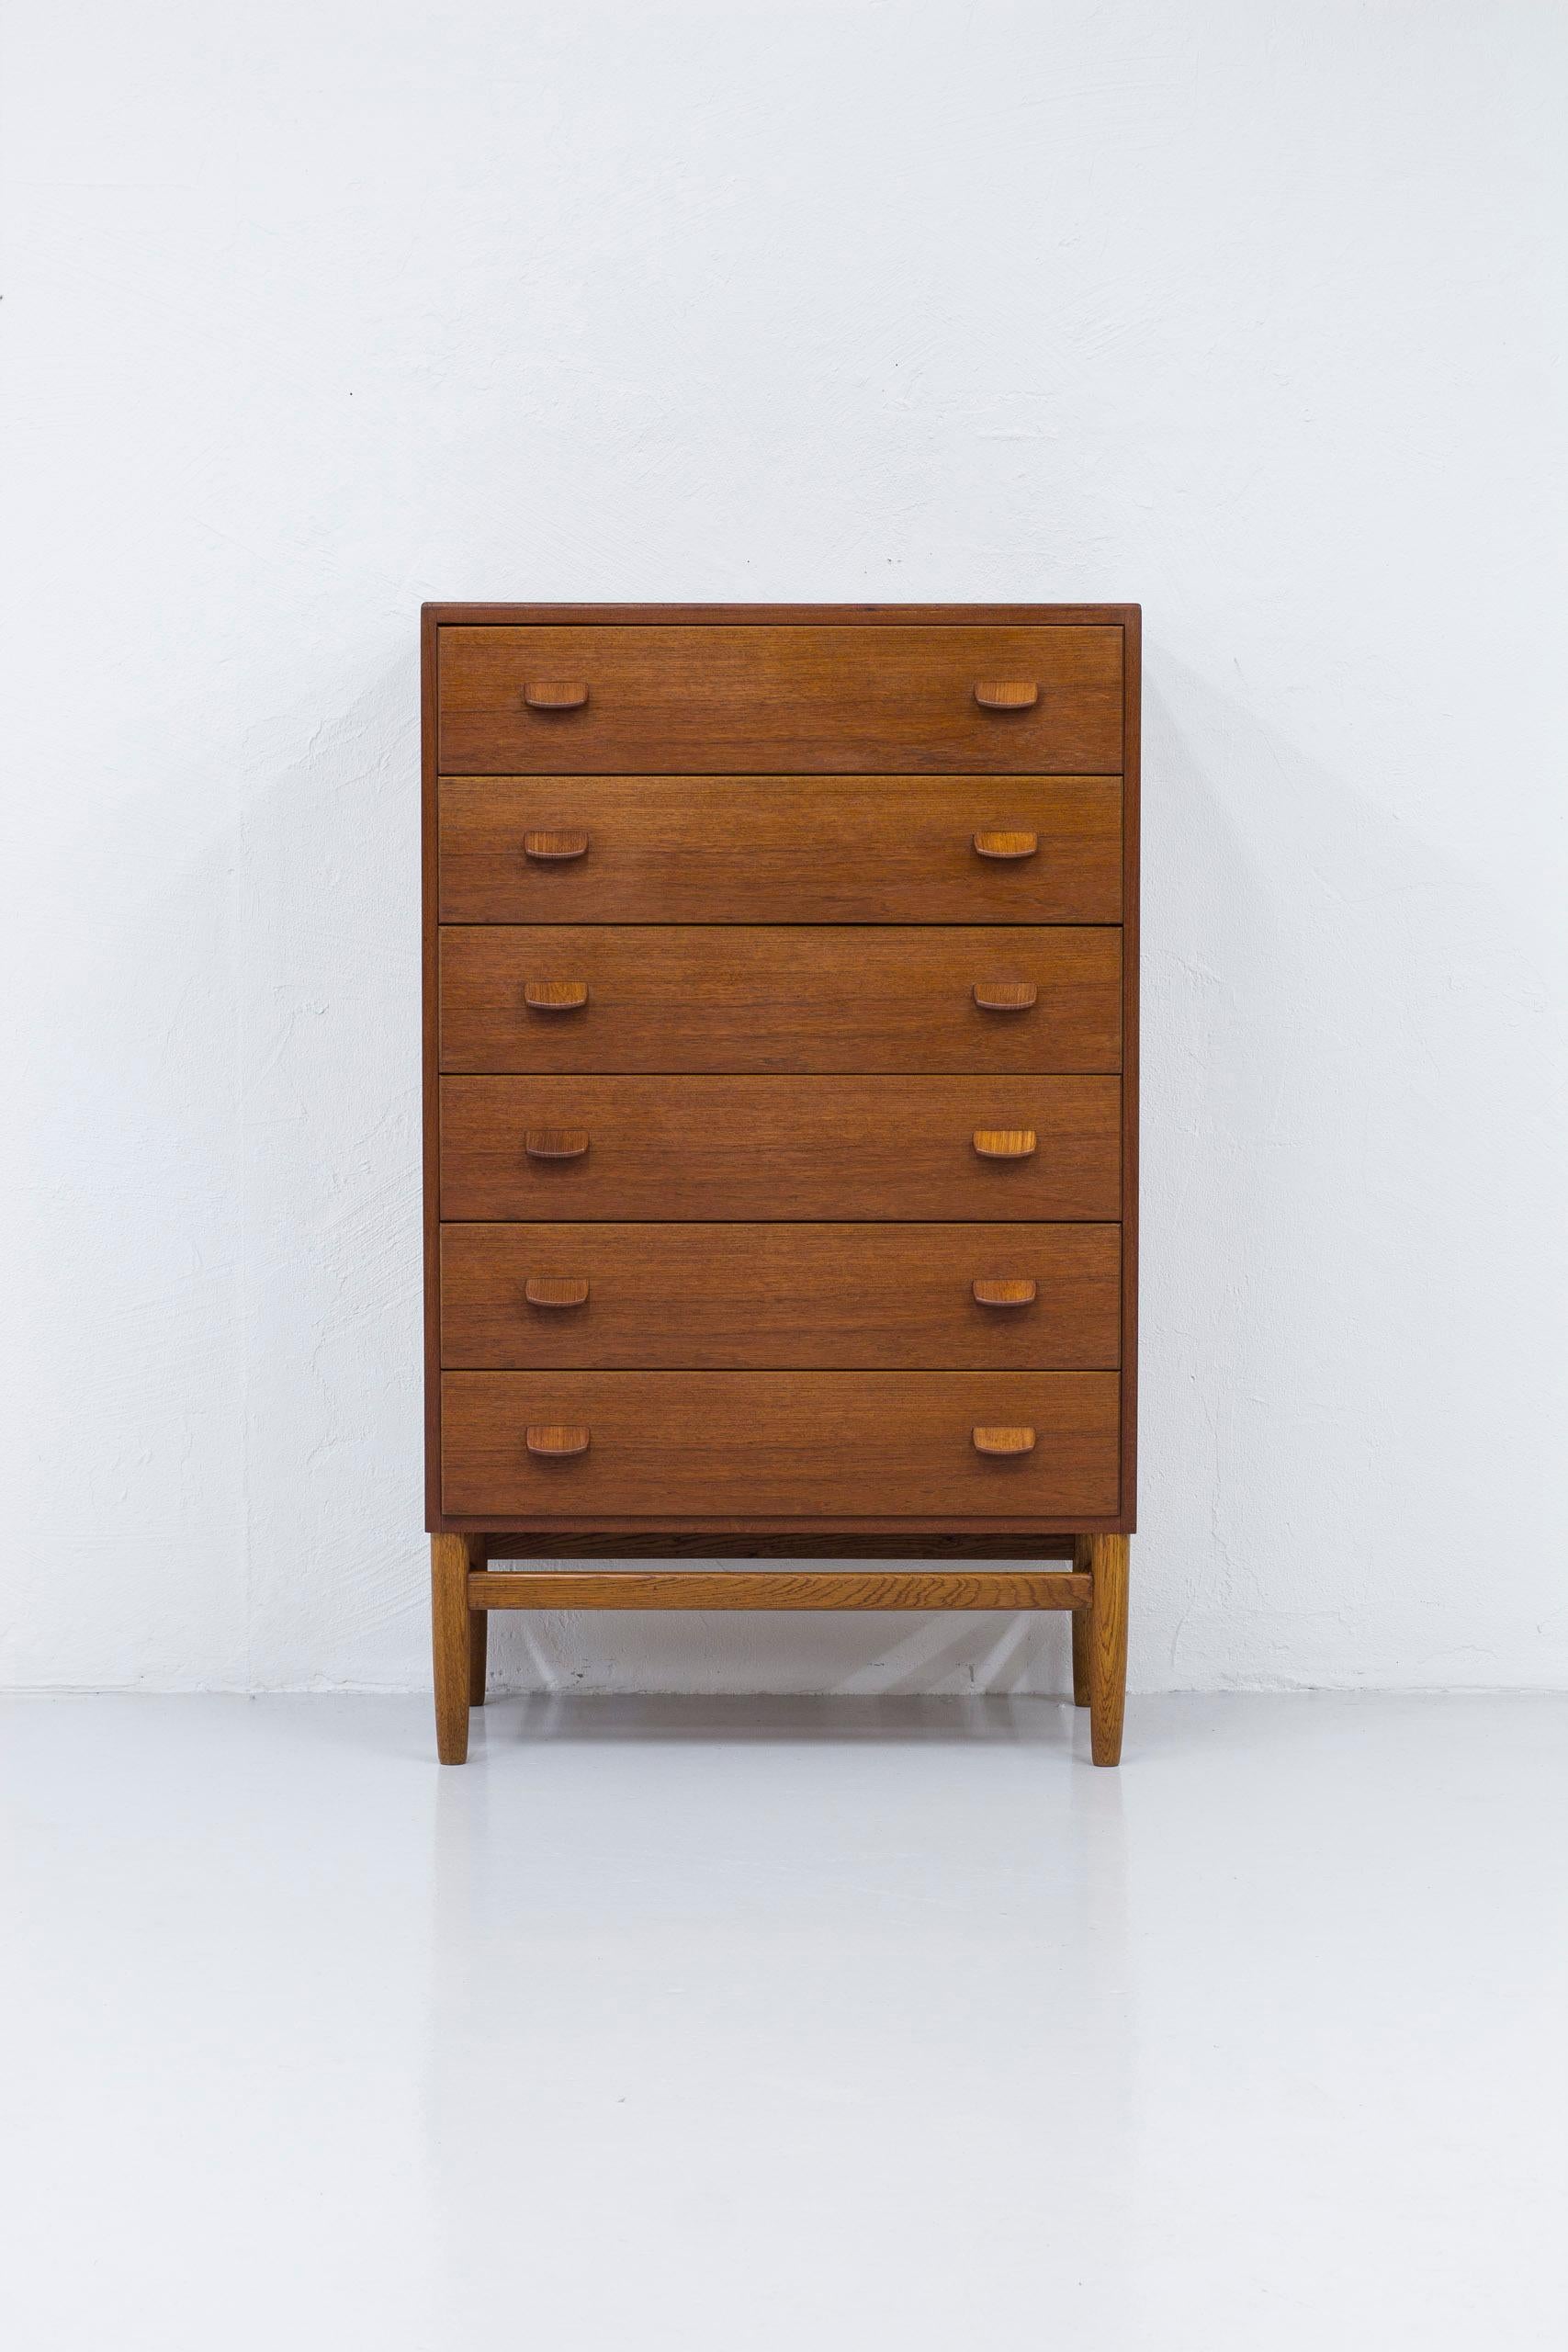 Tall boy chest of drawers by Poul M. Volther. Produced in Denmark by FDB during the 1950s. Teak wood on the body, standing on solid oak legs. The inside of the drawers made from lighter maple wood. Very good vintage condition with light signs of age